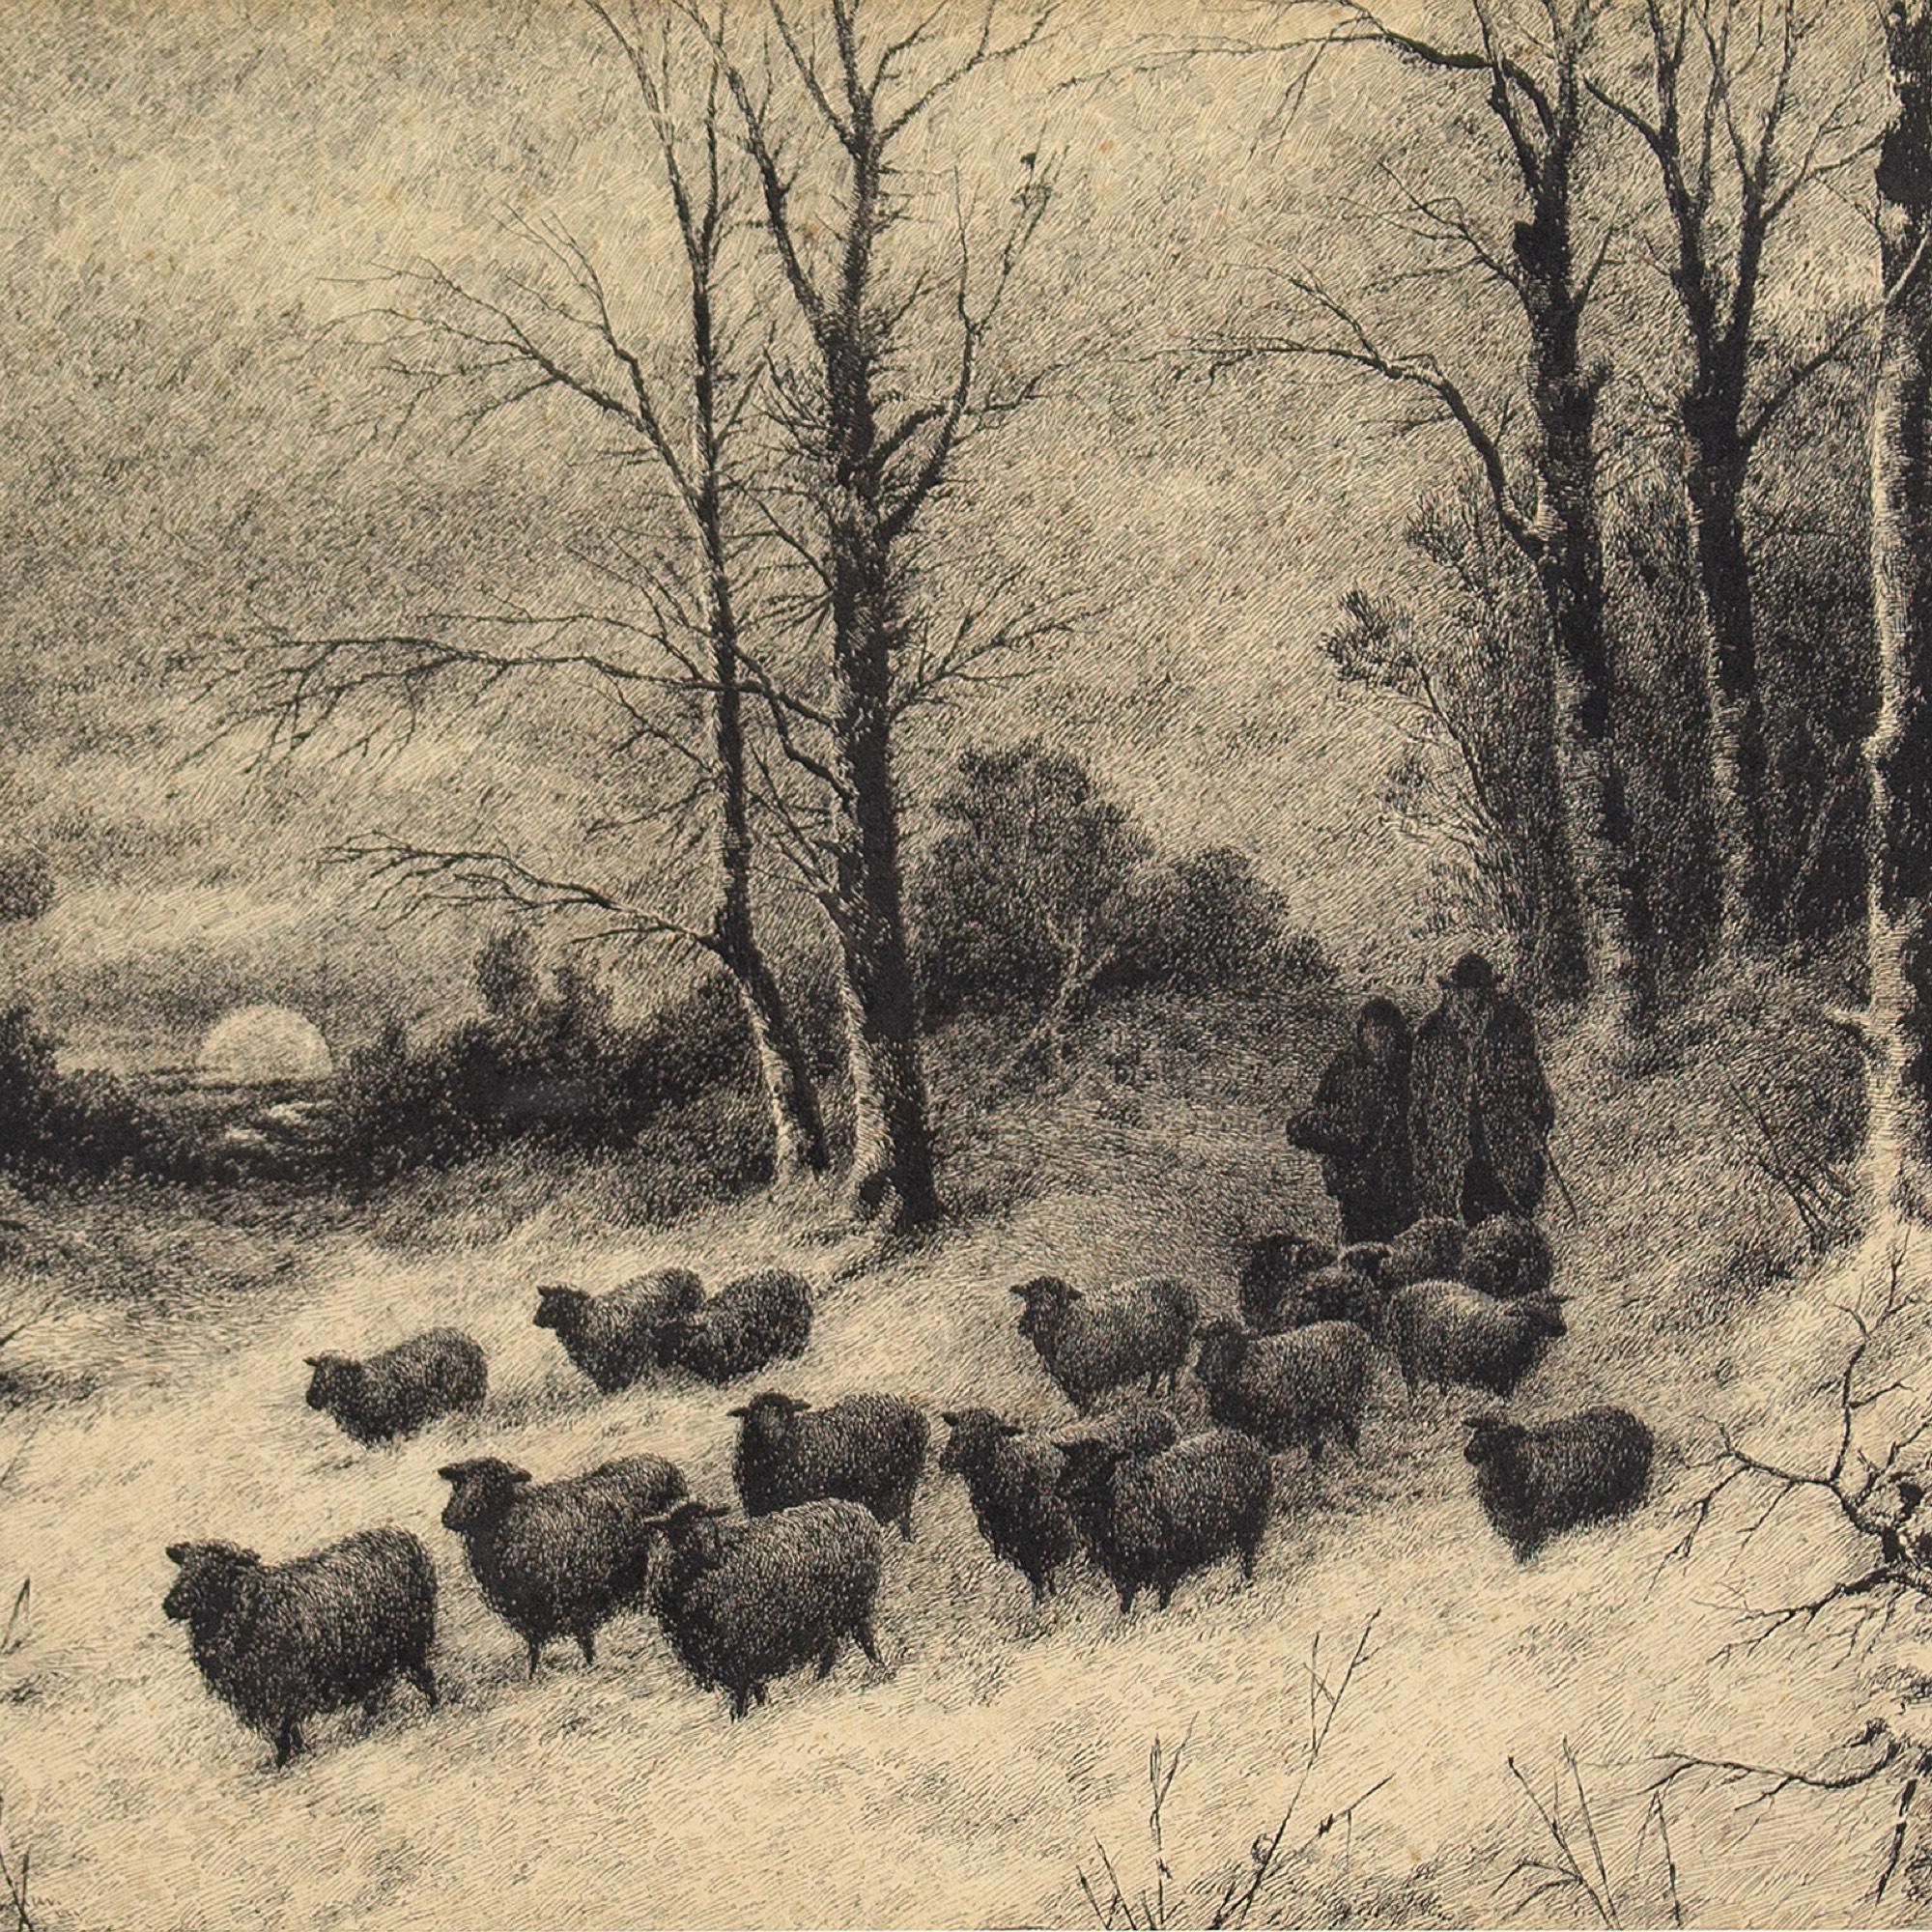 This fine turn-of-the-century drawing depicts a shepherd and his wife following a flock of sheep through a wooded area thick with snow. It’s exquisitely rendered in minute dashes and crosshatching.

One of the masters of this genre was Scottish